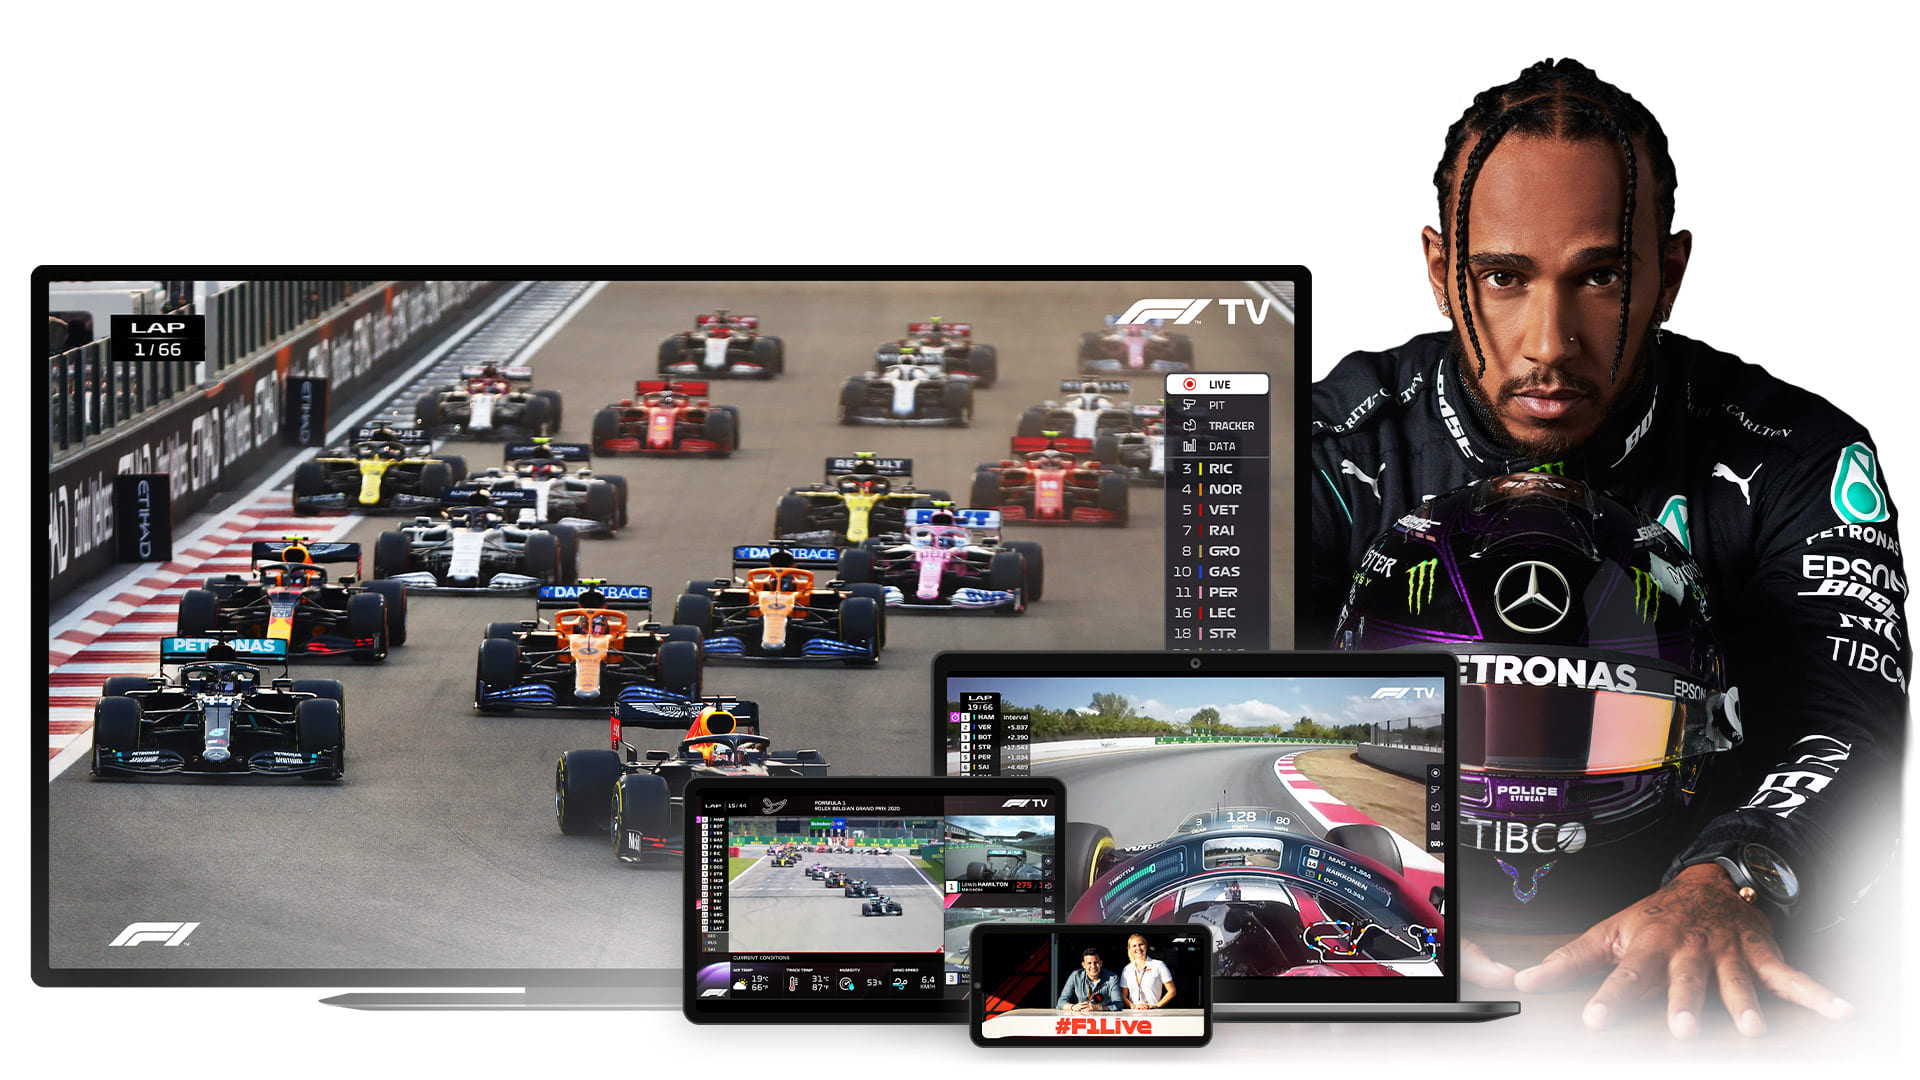 F1 TV Pro made available to Telcel and Telmex subscribers